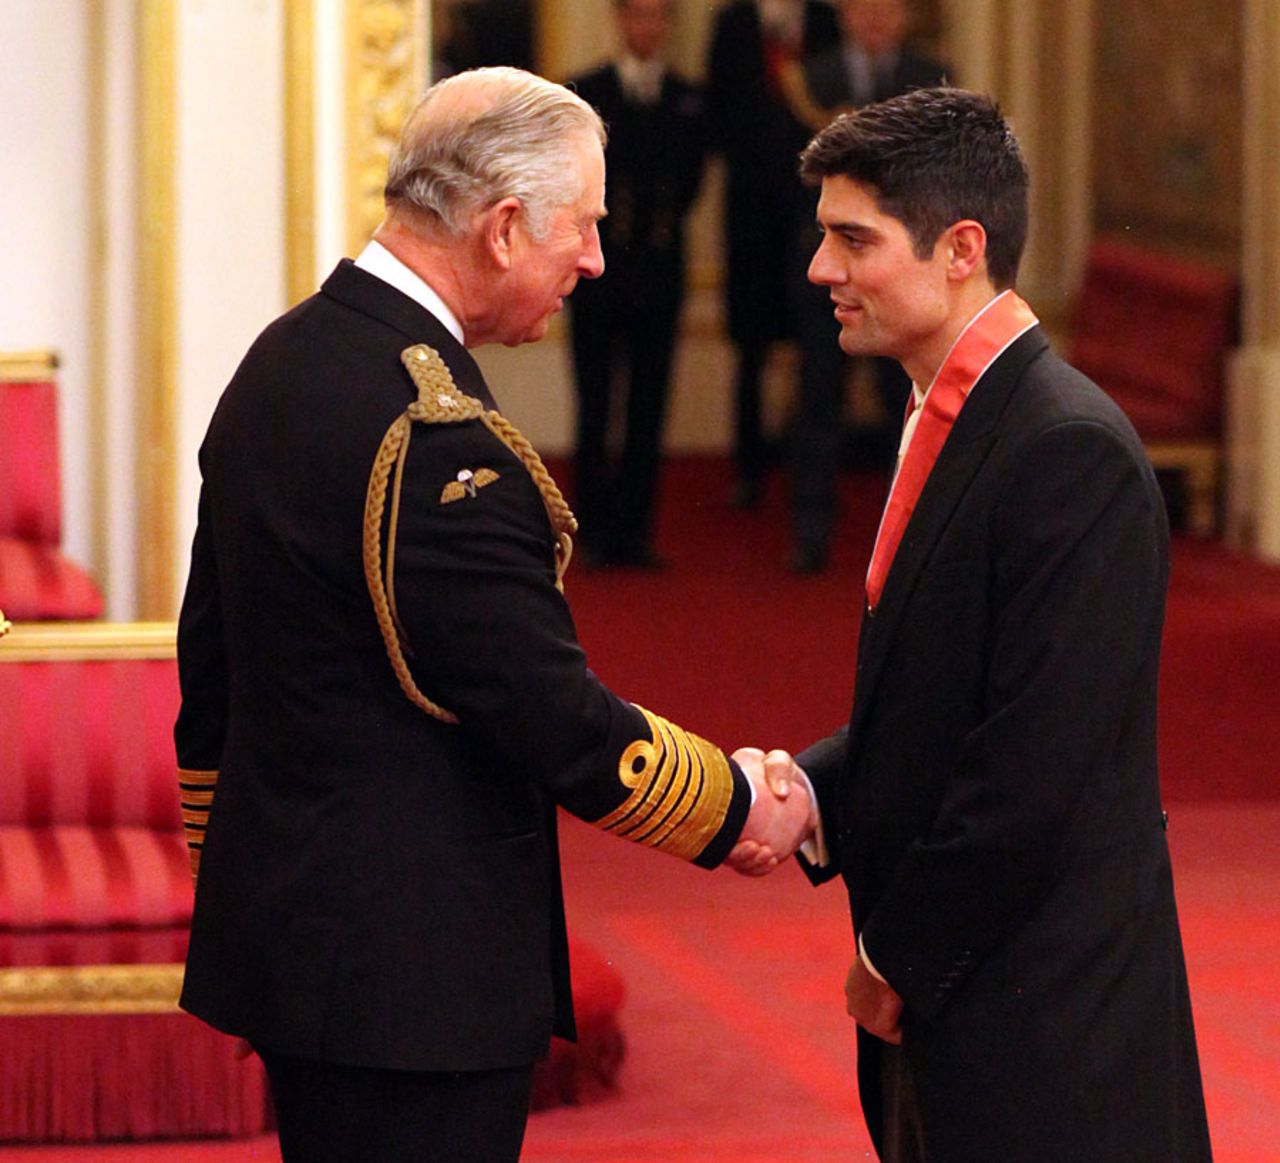 Alastair Cook received his CBE from the Prince of Wales, London, February 3, 2017